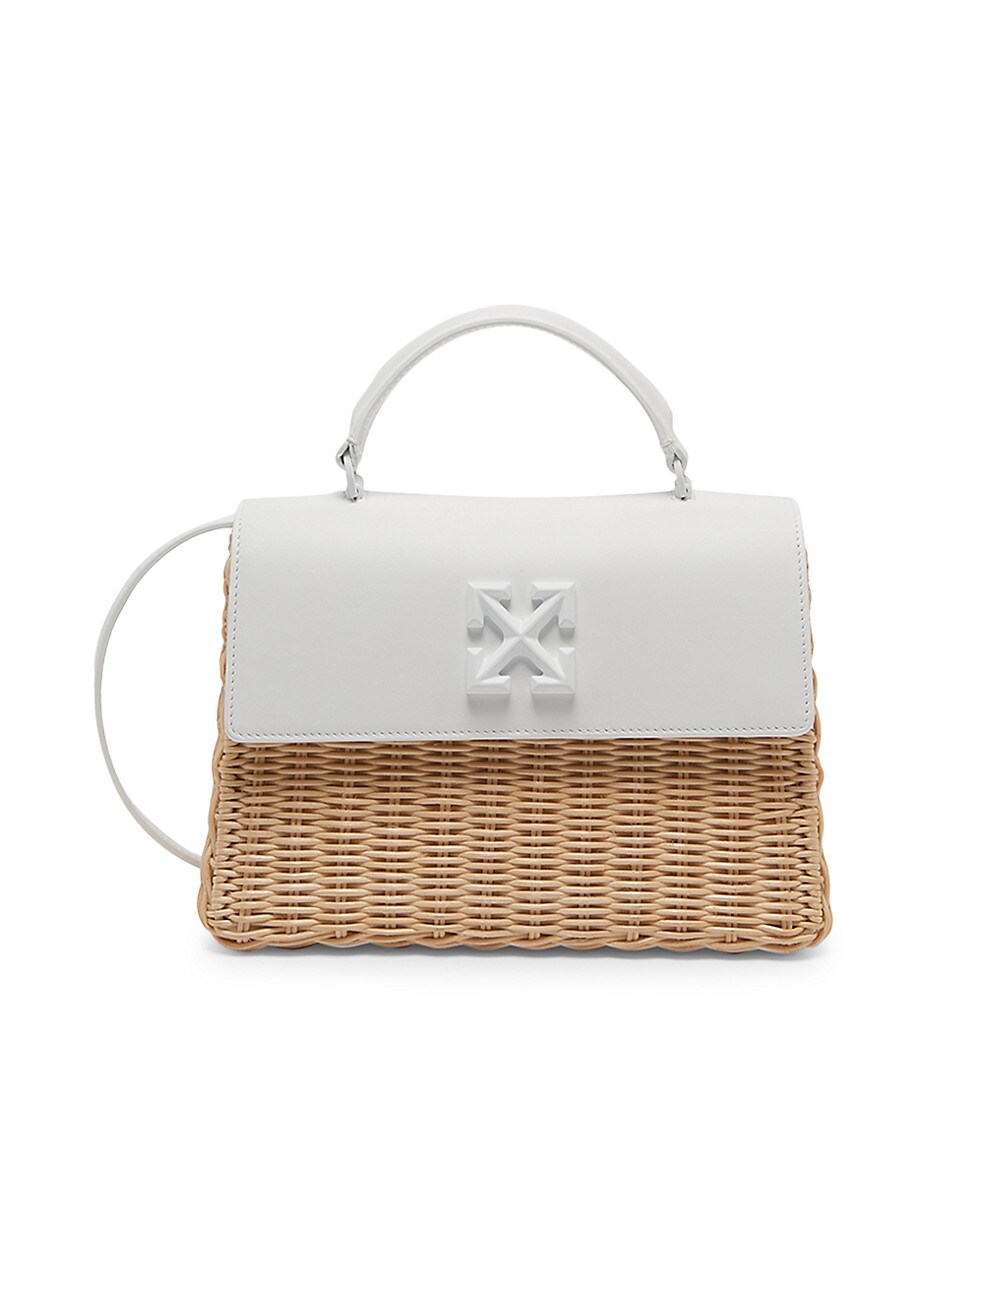 Jitney Off-White Tote Bag in Straw and Leather